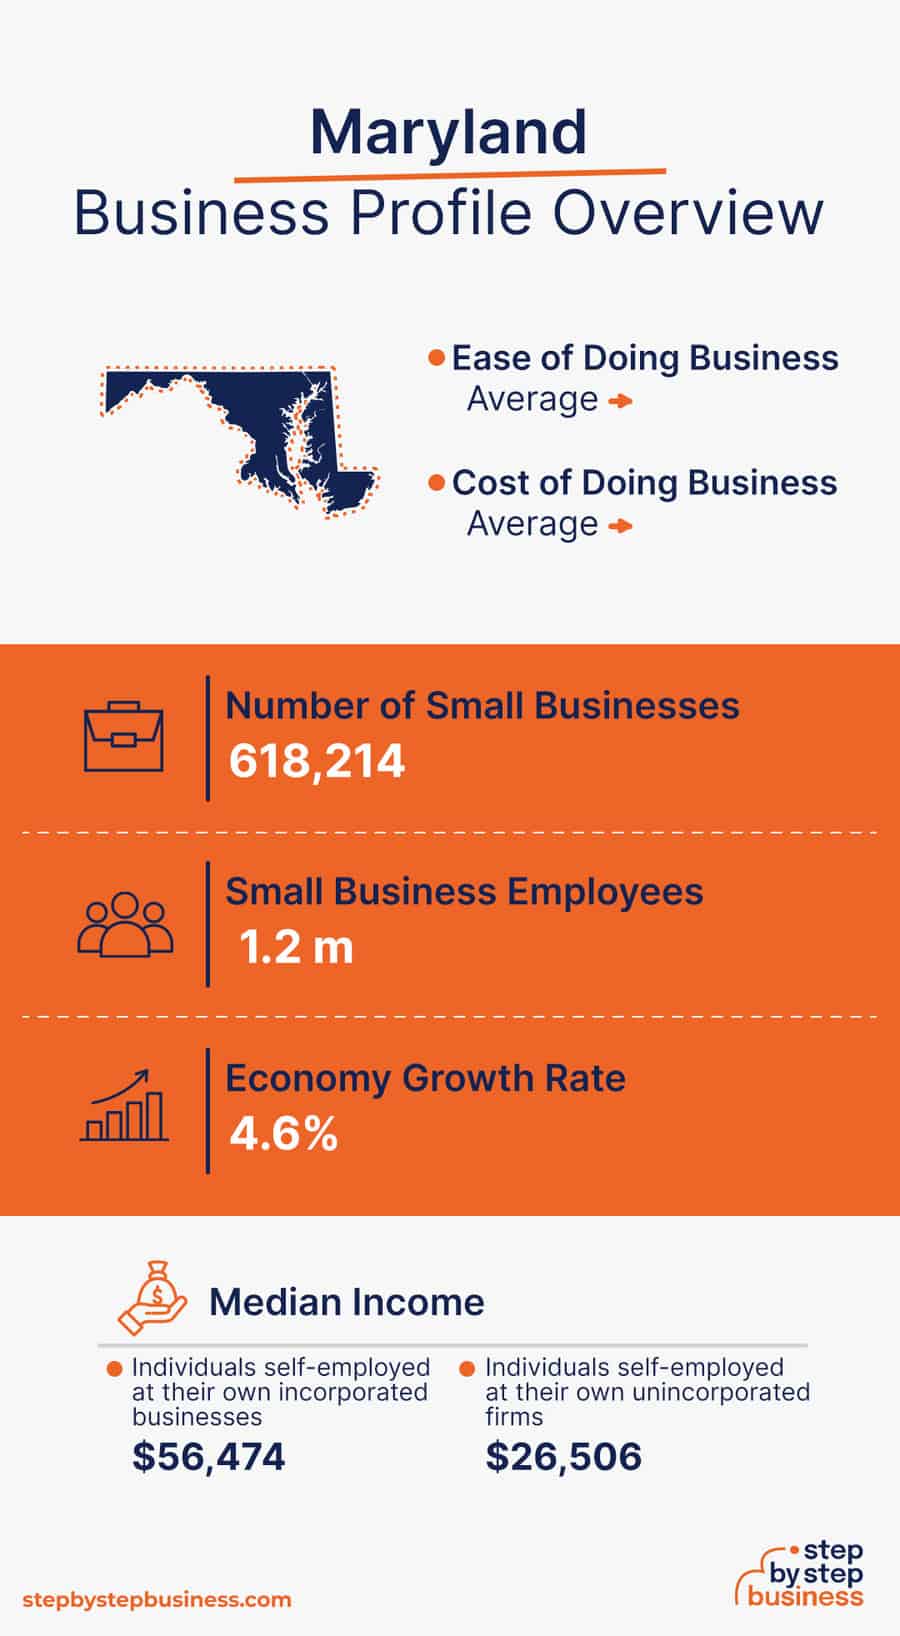 Maryland Business Profile Overview